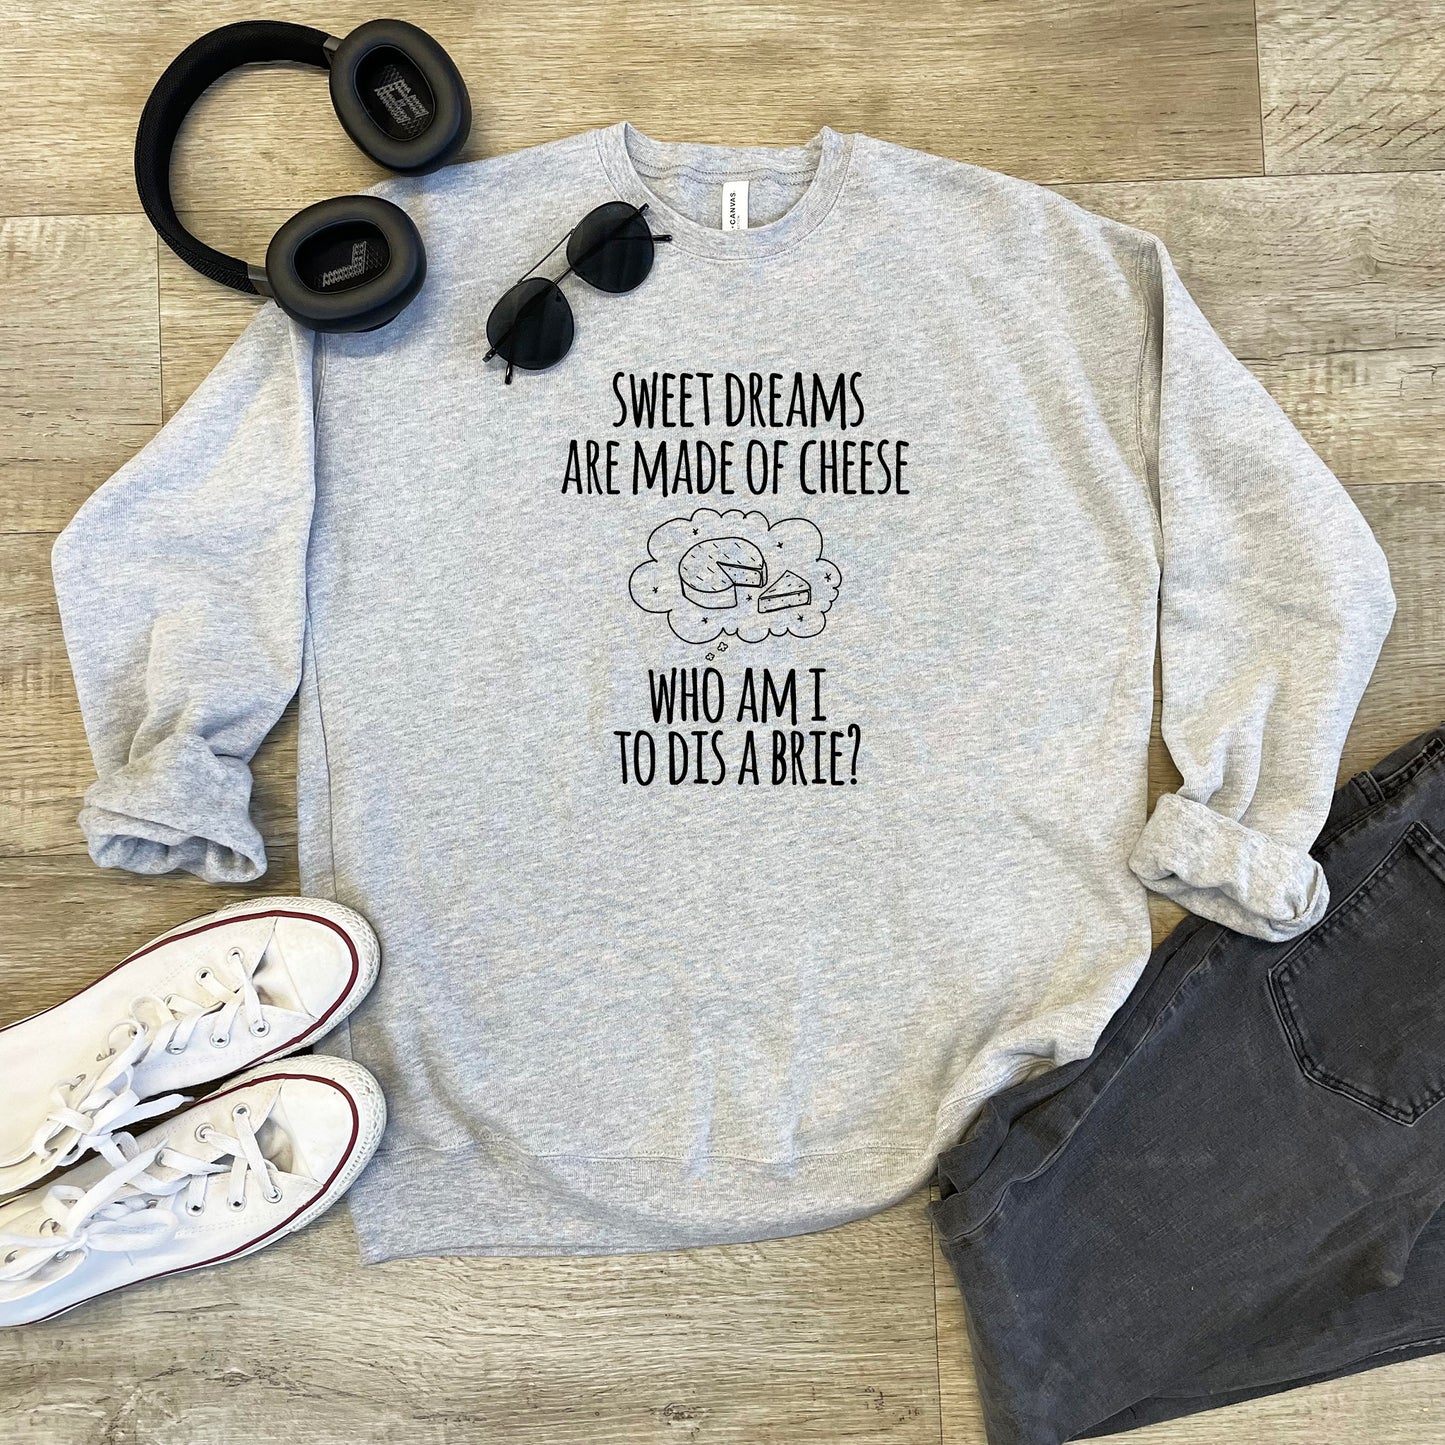 Sweet Dreams Are Made Of Cheese, Who Am I To Dis A Brie? - Unisex Sweatshirt - Heather Gray or Dusty Blue